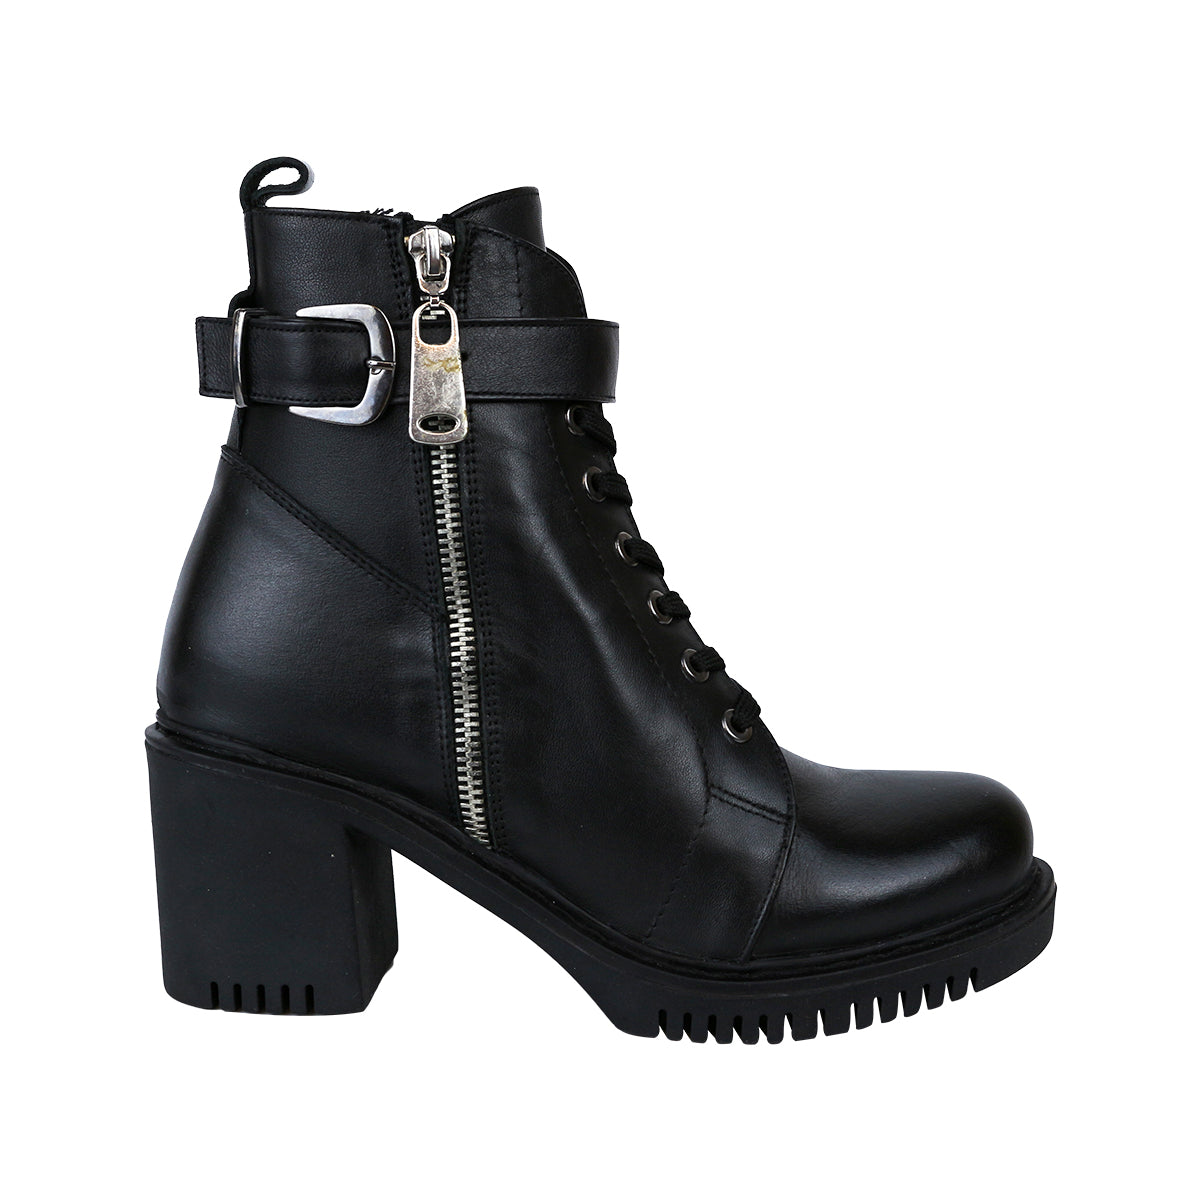 VEGA Woman Laced With Zipper Belted Genuine Leather Boots